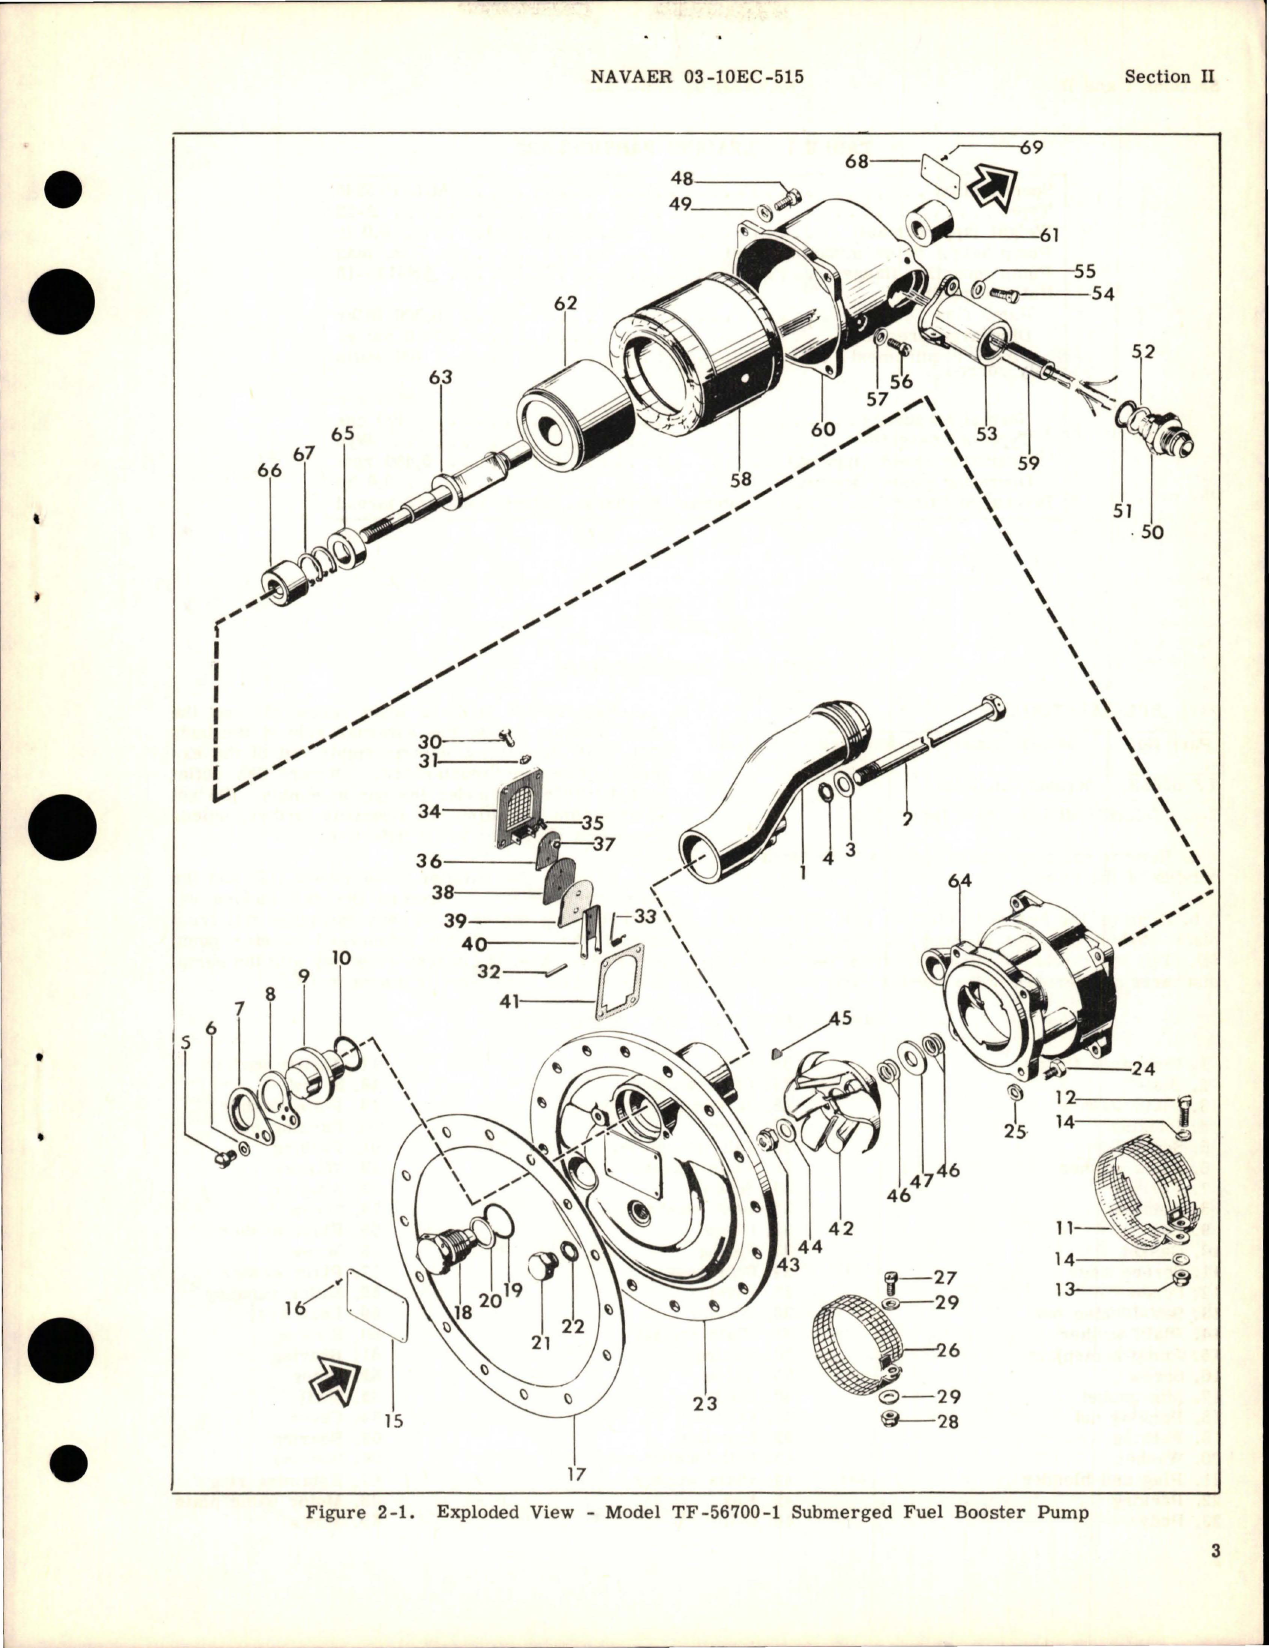 Sample page 5 from AirCorps Library document: Illustrated Parts Breakdown for Submerged Fuel Booster Pump - TF-56700 Series